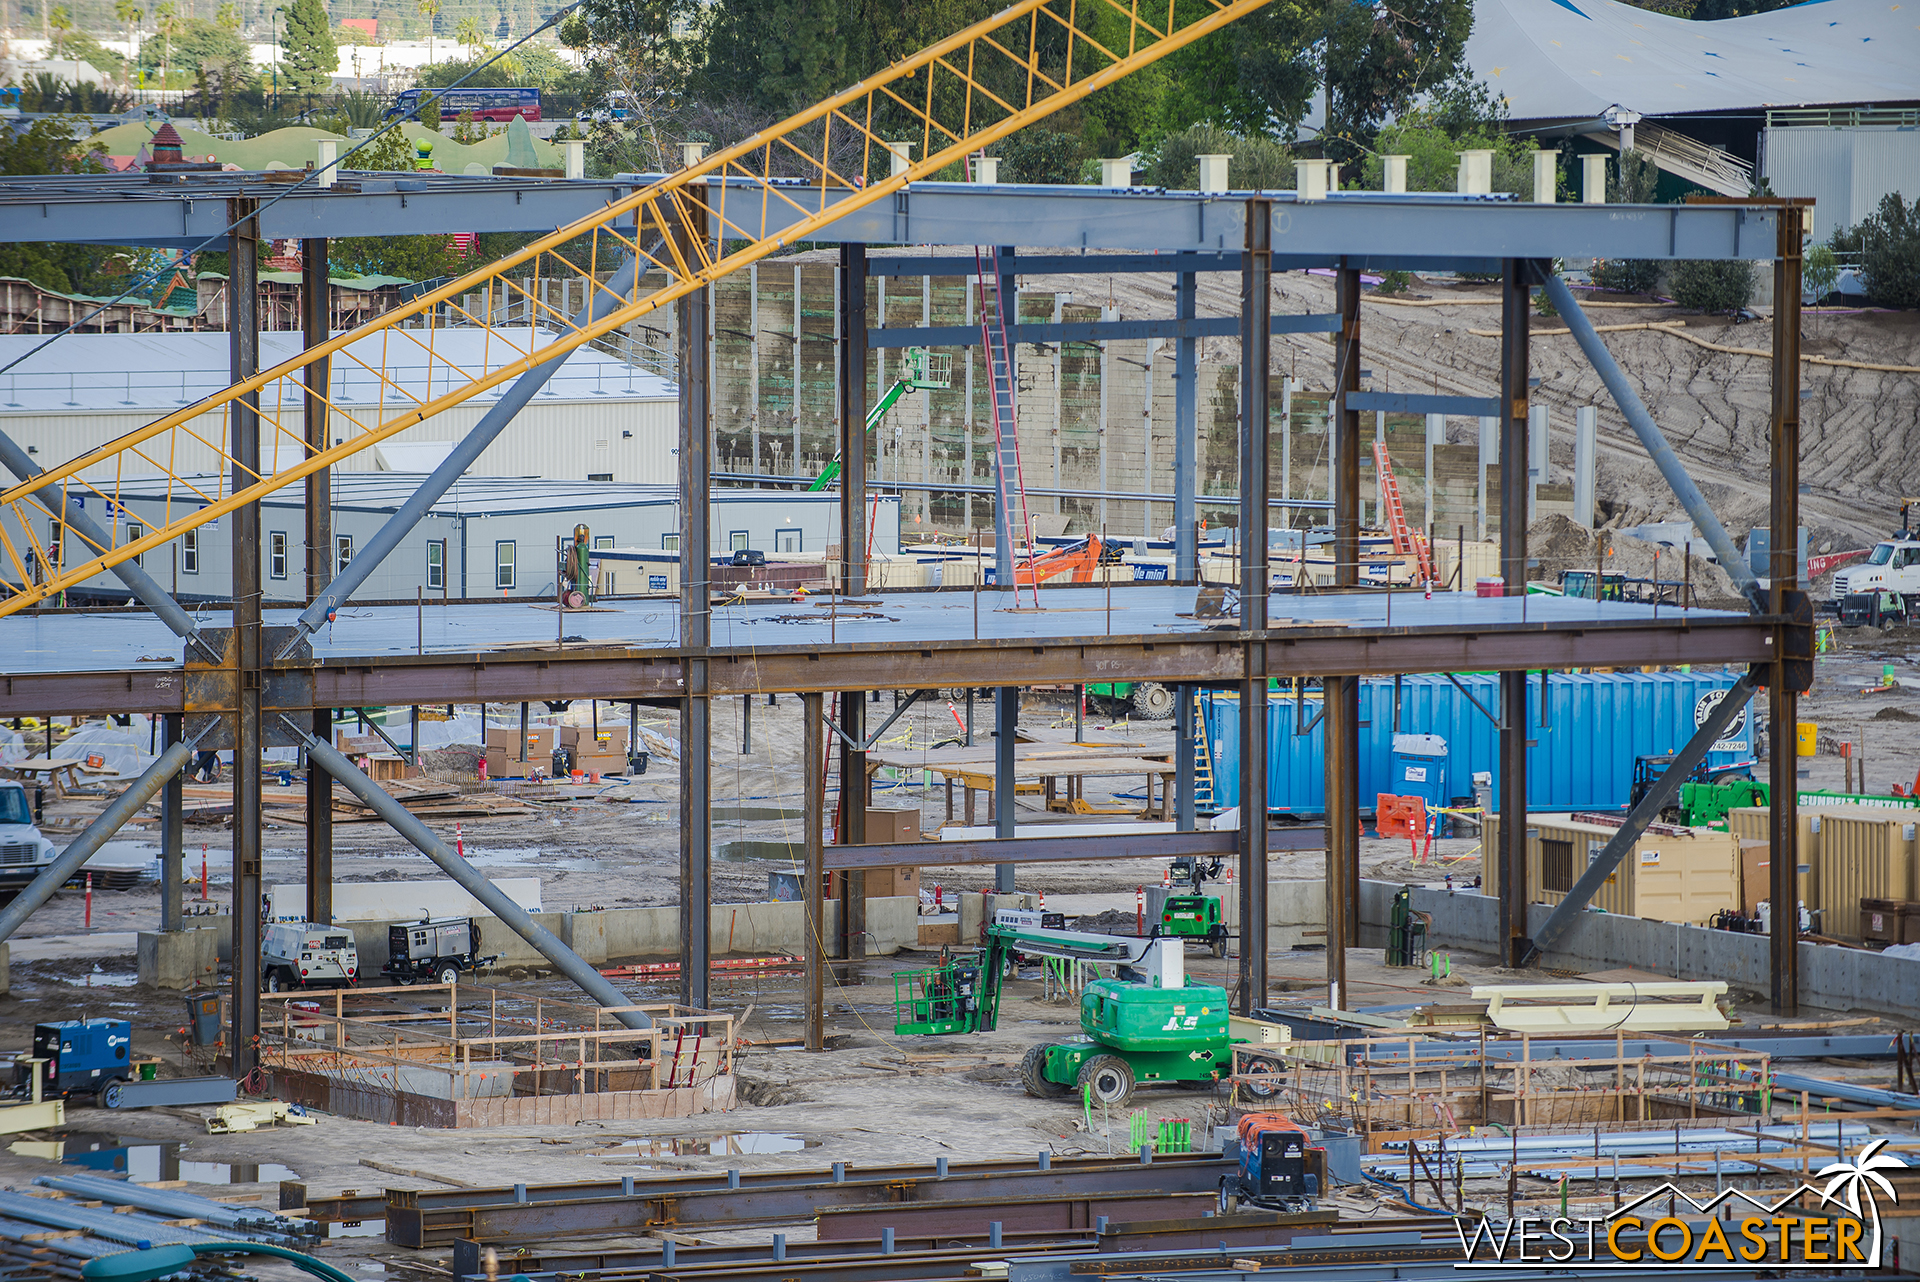  Over at the show building for E-Ticket #1, more steel has gone up.&nbsp; 